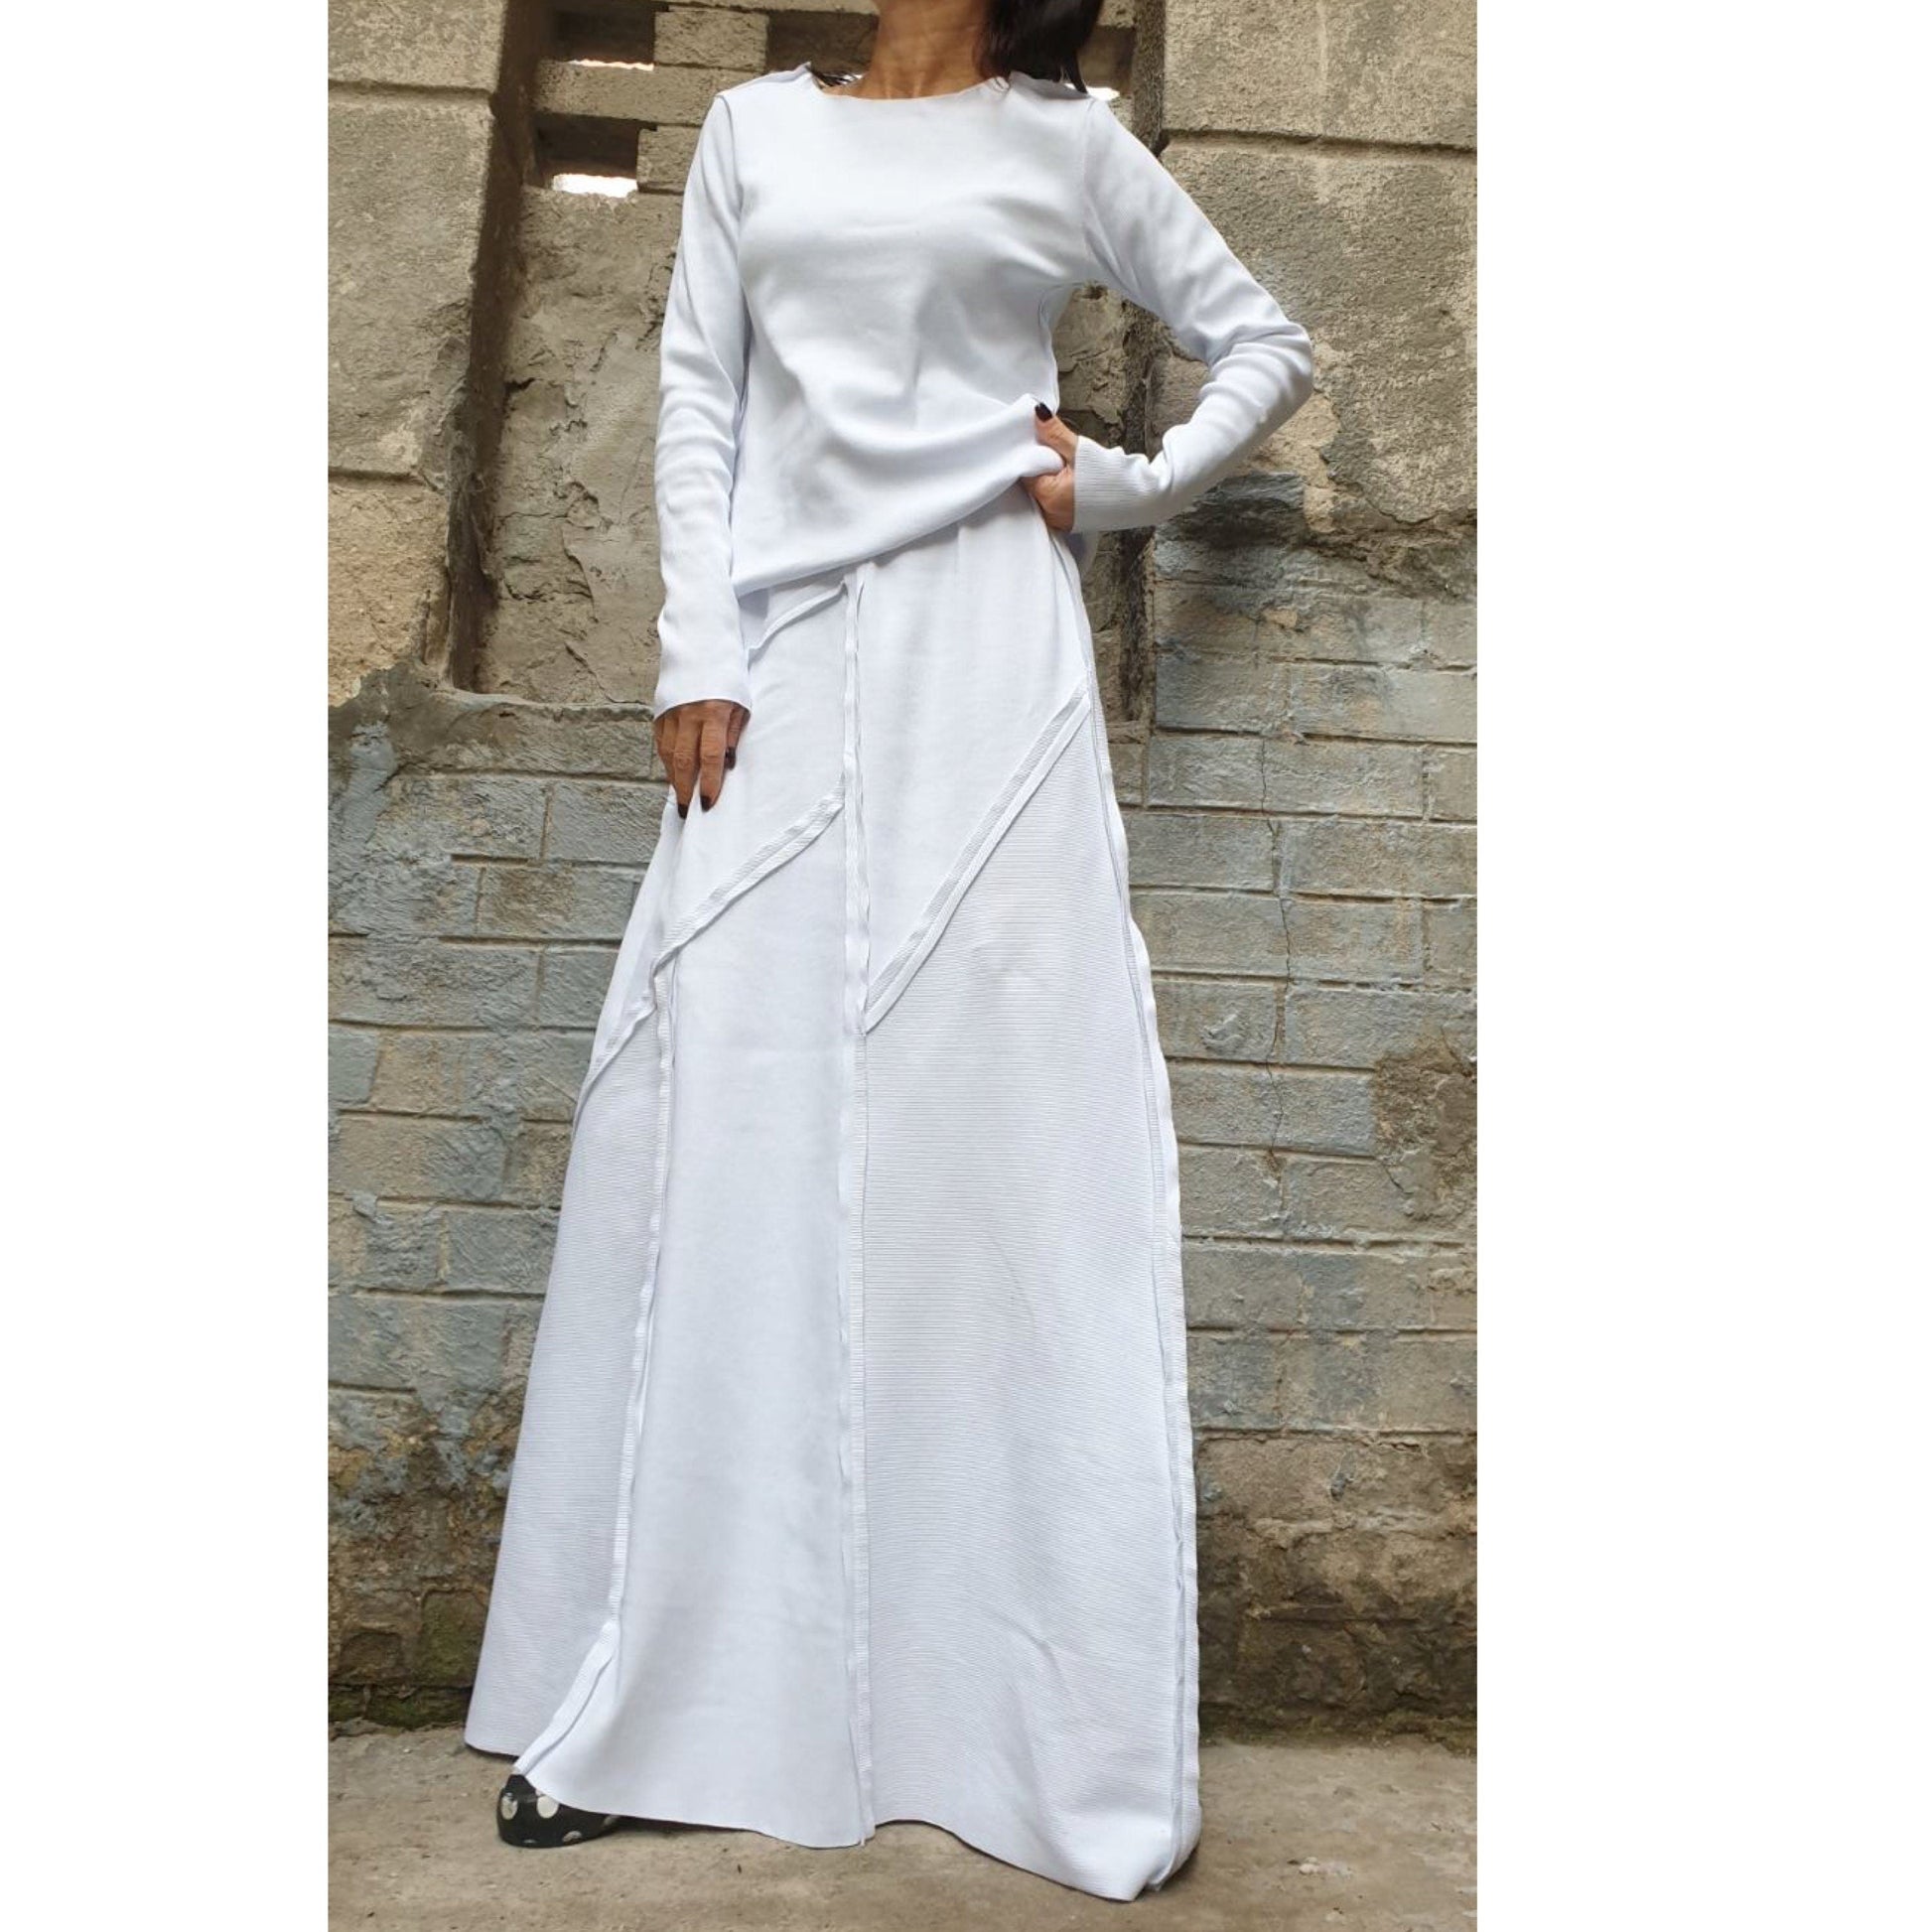 Two Piece White Set - Handmade clothing from AngelBySilvia - Top Designer Brands 